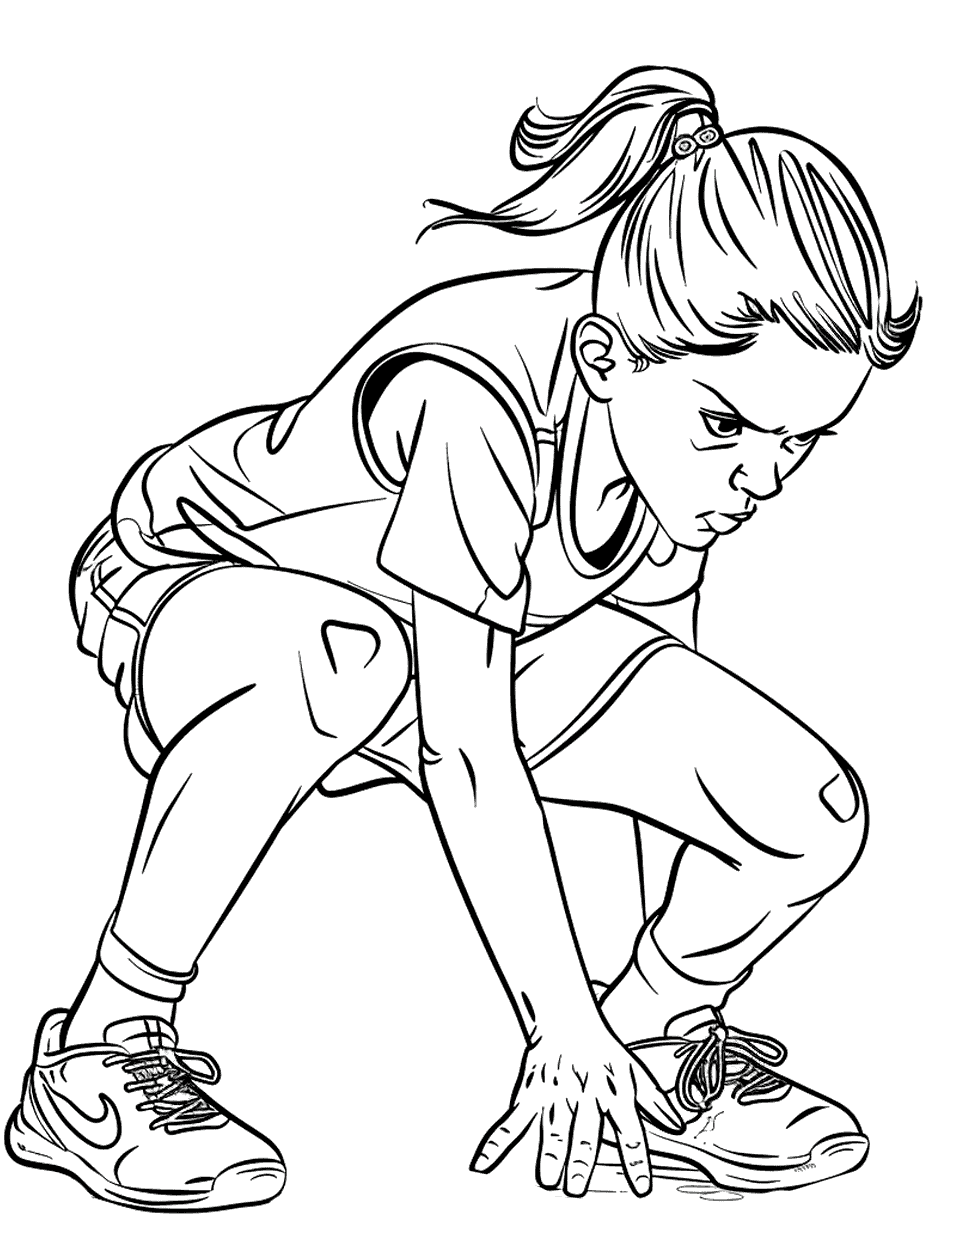 Olympic Sprinter at the Start Sports Coloring Page - Sprinter crouched at the starting line, ready for the gunshot to start the race.